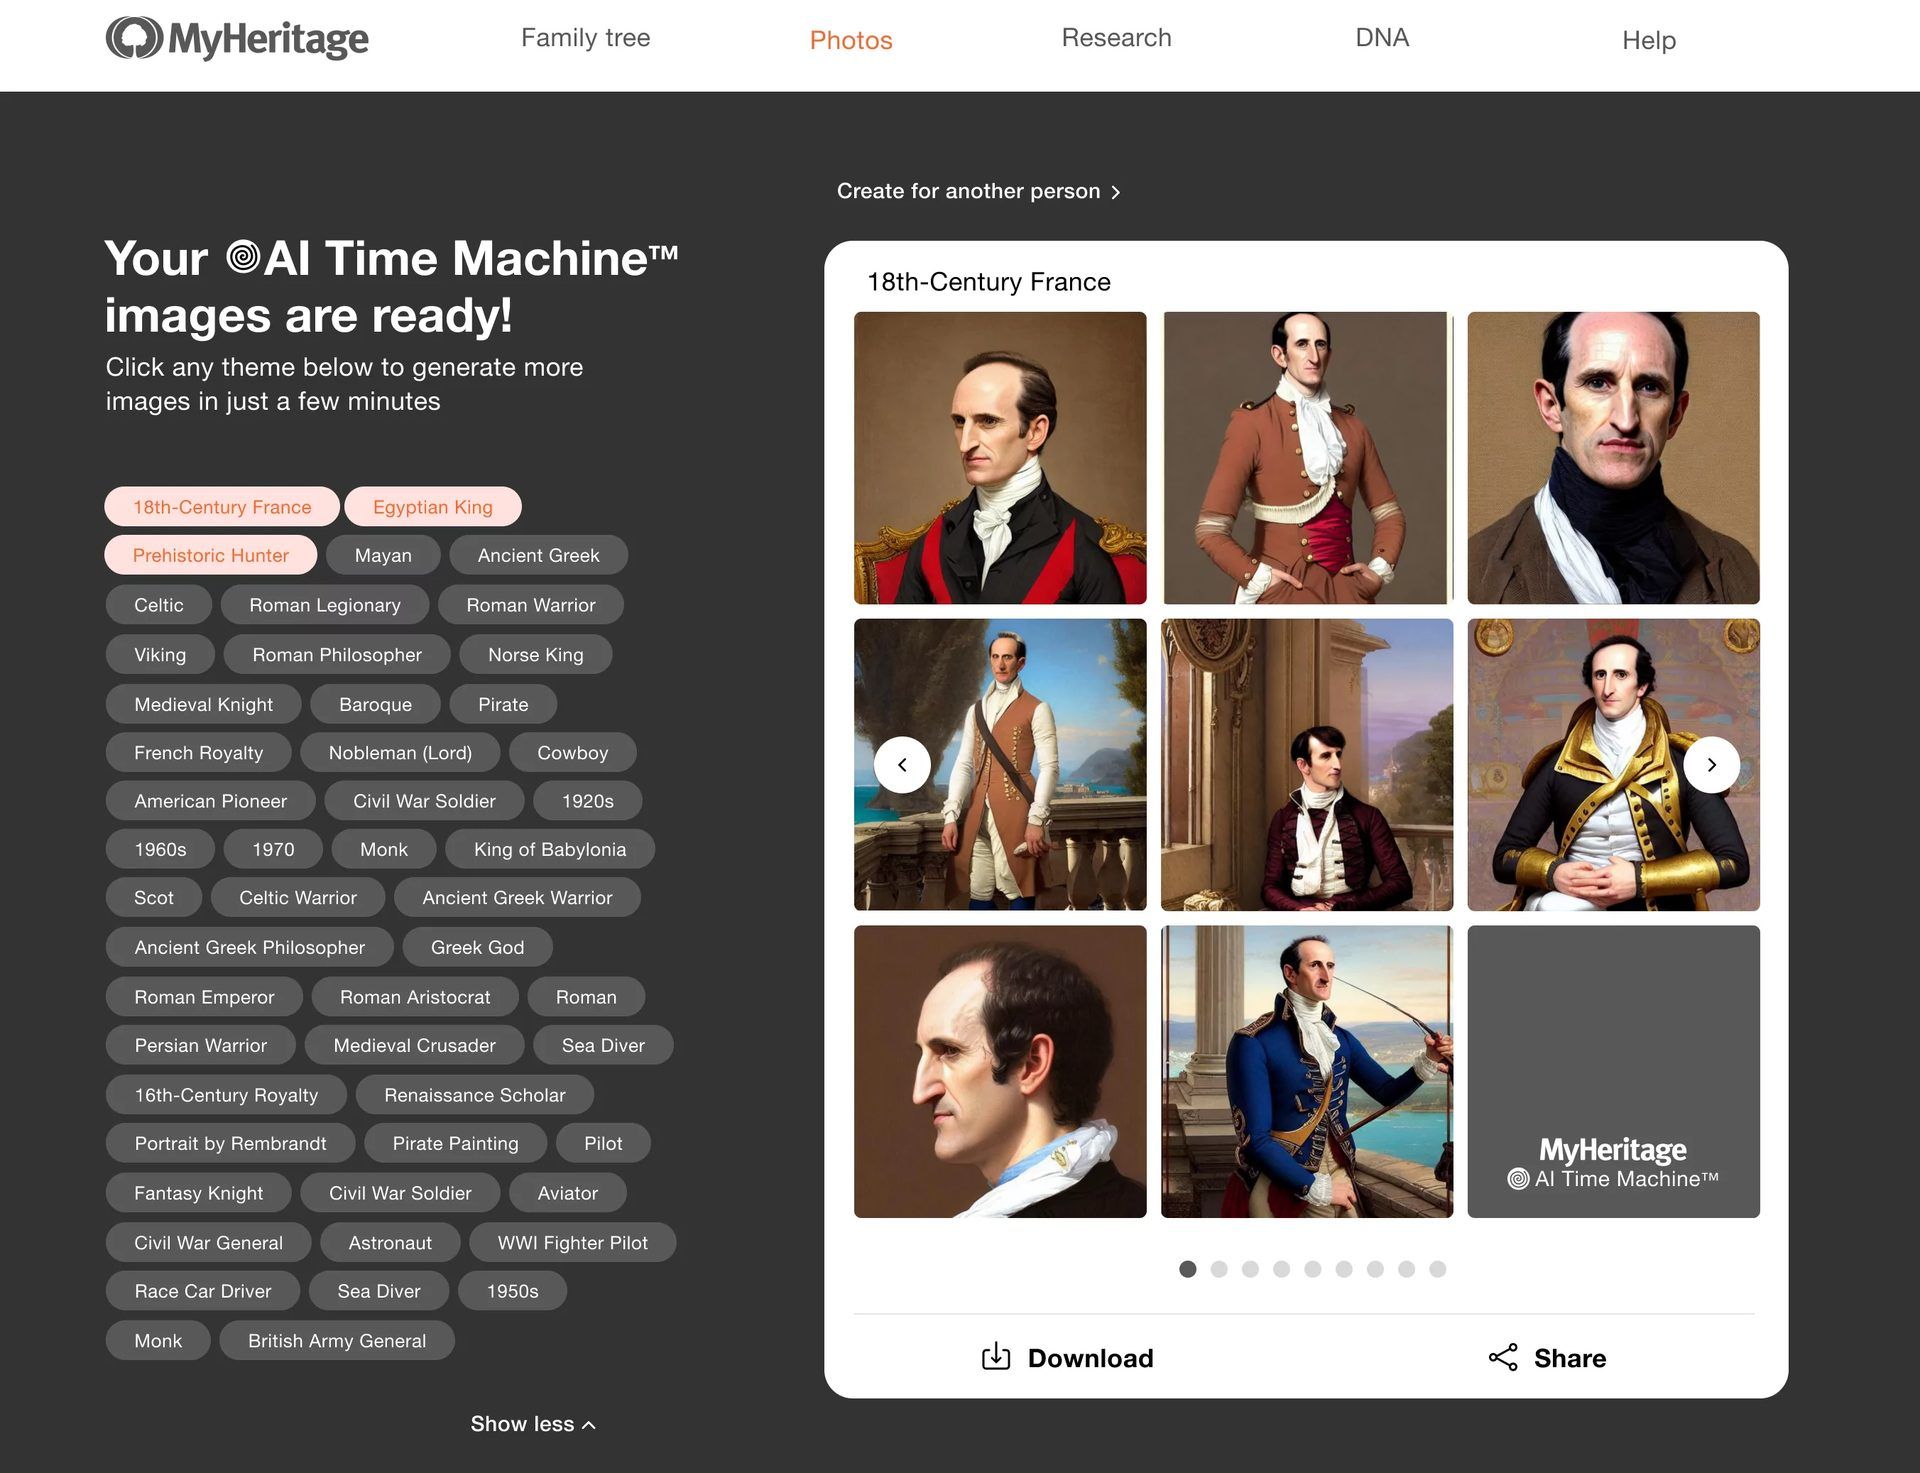 MyHeritage AI Time Machine lets you travel to the most iconic historical eras